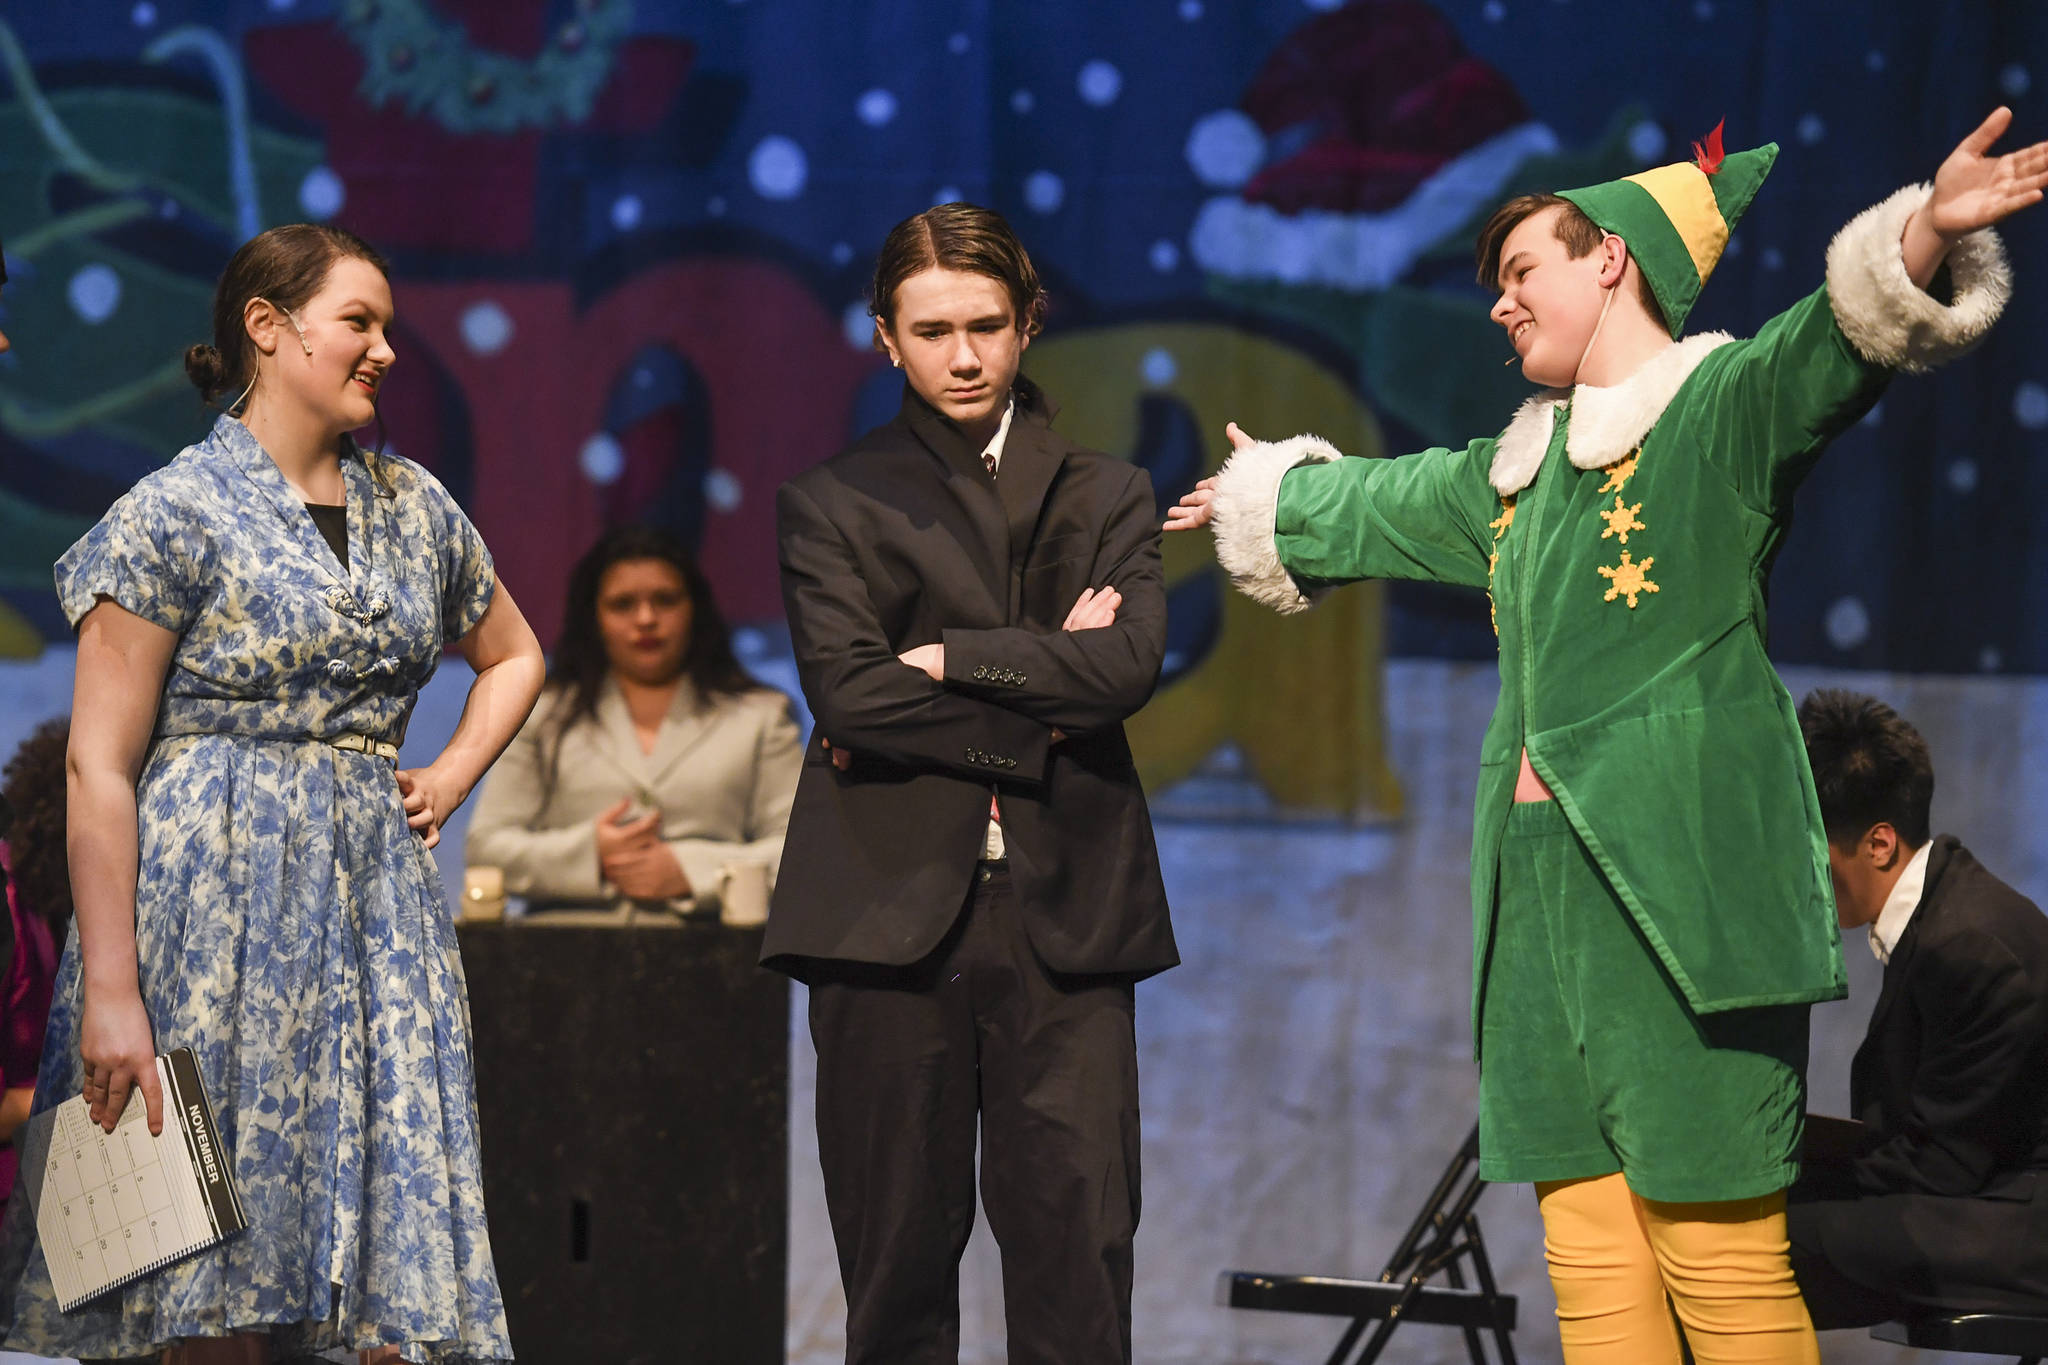 Emily Hobbs, played by Amanda McDowell, left, and her husband, Walter Hobbs, played by Jager Hunt, center, are introduced to Buddy the Elf, played by Toby Russell, during rehearsal of “Elf, the Musicial” at Juneau-Douglas High School: Yadaa.at Kalé on Friday, Dec. 13, 2019. (Michael Penn | Juneau Empire)